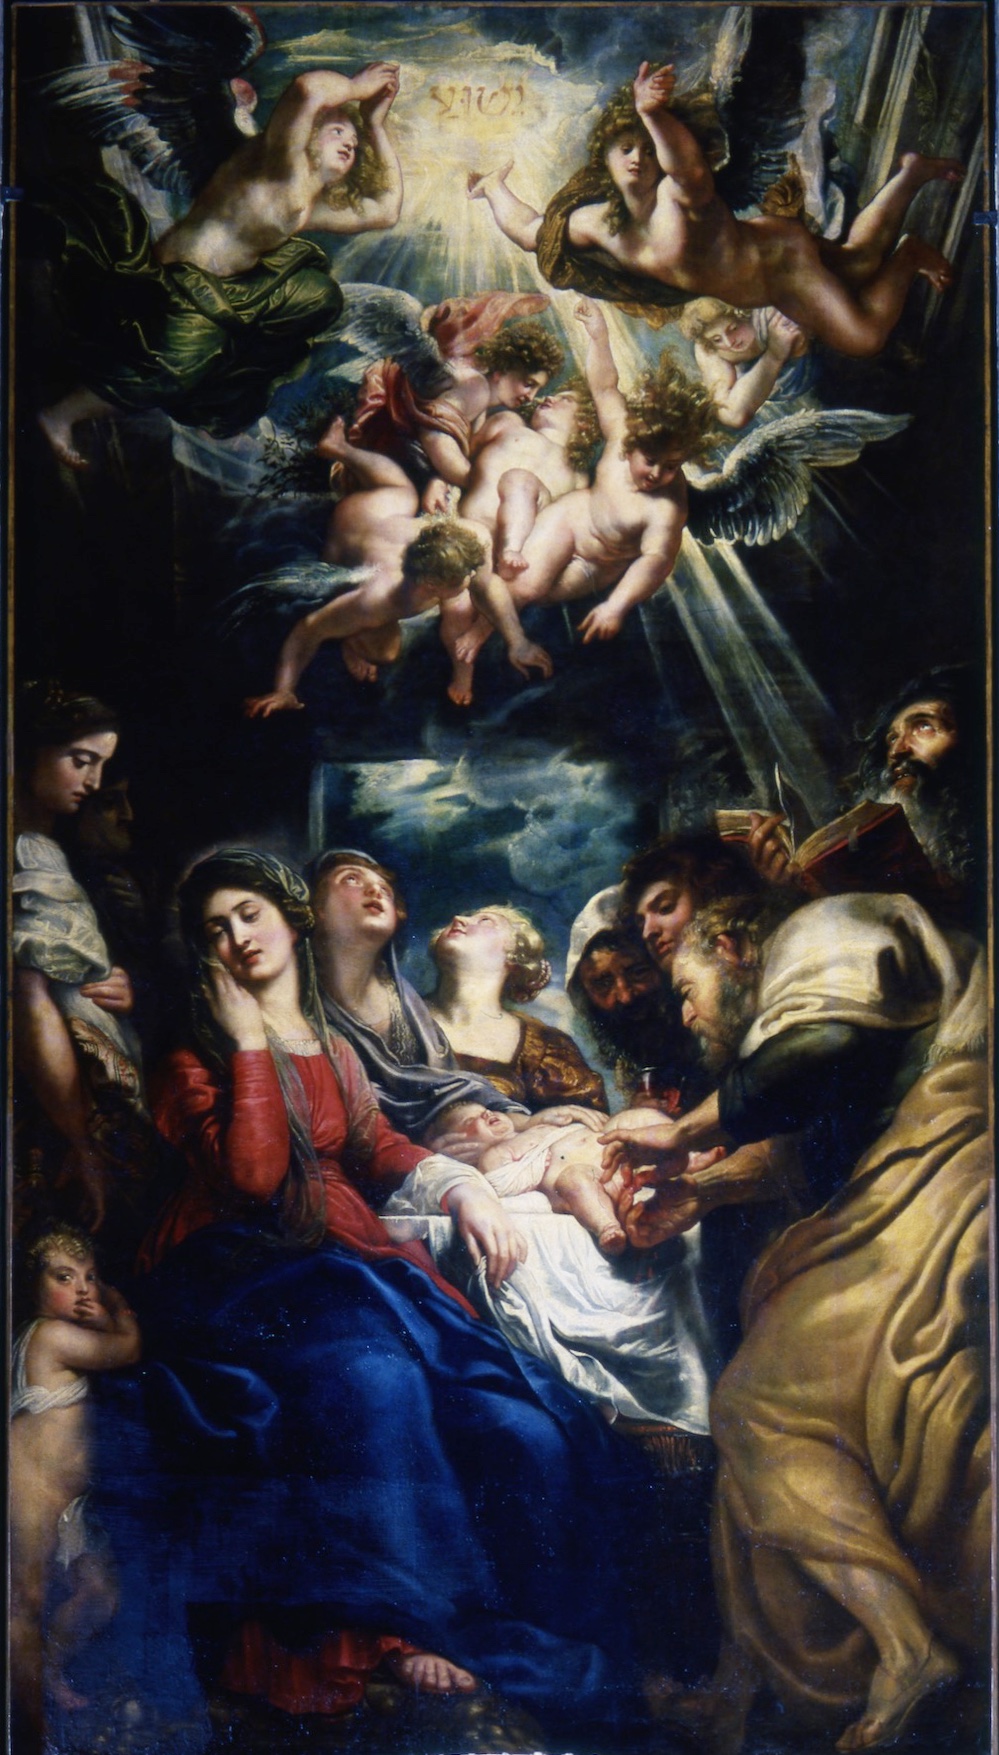 Peter Paul Rubens, Circumcision (1605; oil on canvas, 400 x 225 cm; Genoa, Church of Saints Ambrose and Andrew)